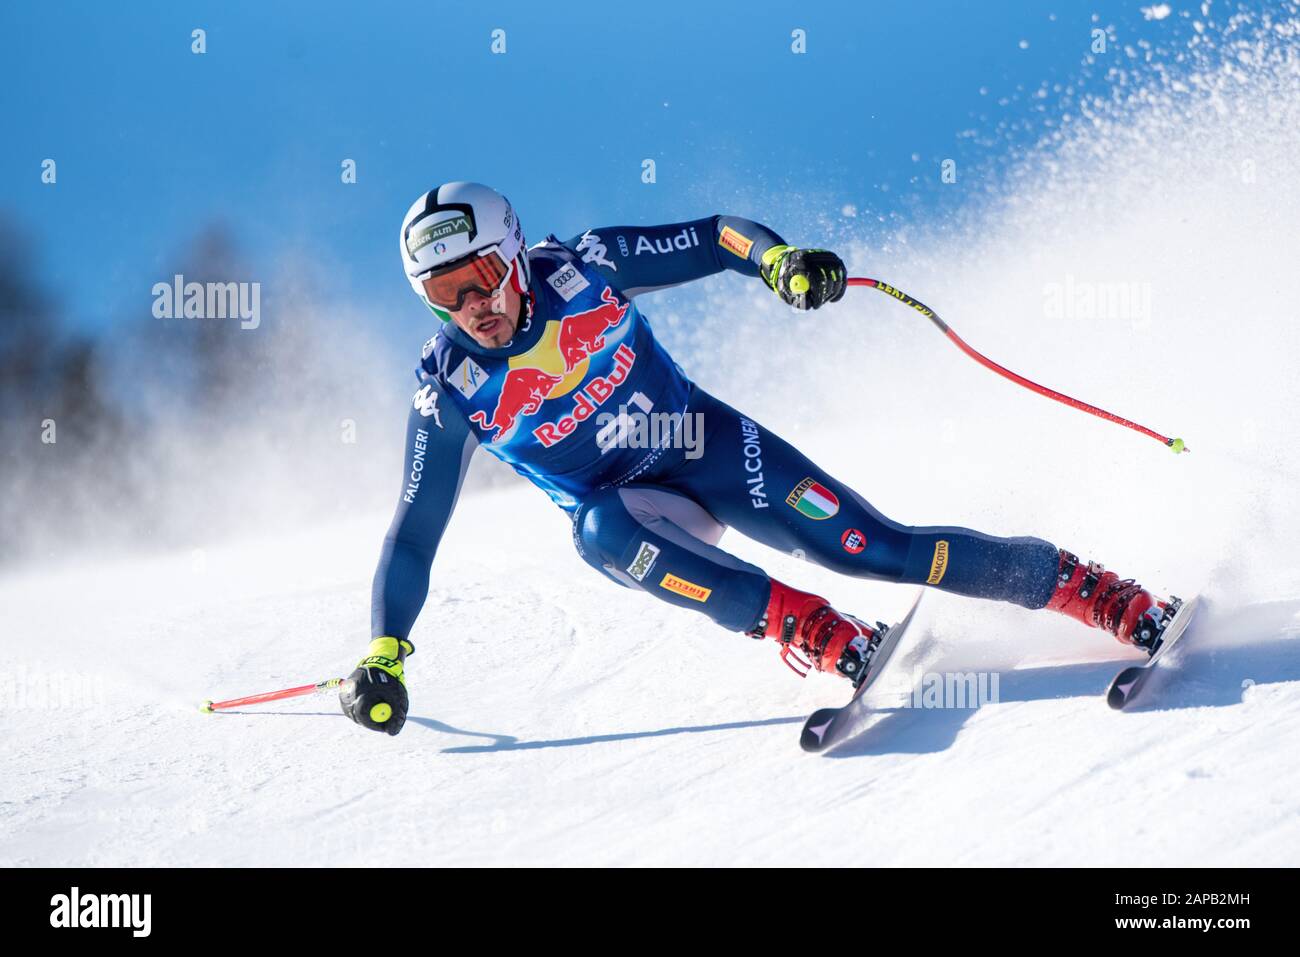 Peter Fill of Italy at the Ski Alpin: 80. Hahnenkamm Race 2020 - Audi FIS Alpine Ski World Cup - Men's Downhill Training at the Streif on January 22, 2020 in Kitzbuehel, AUSTRIA. (Photo by Horst Ettensberger/ESPA-Images) Stock Photo